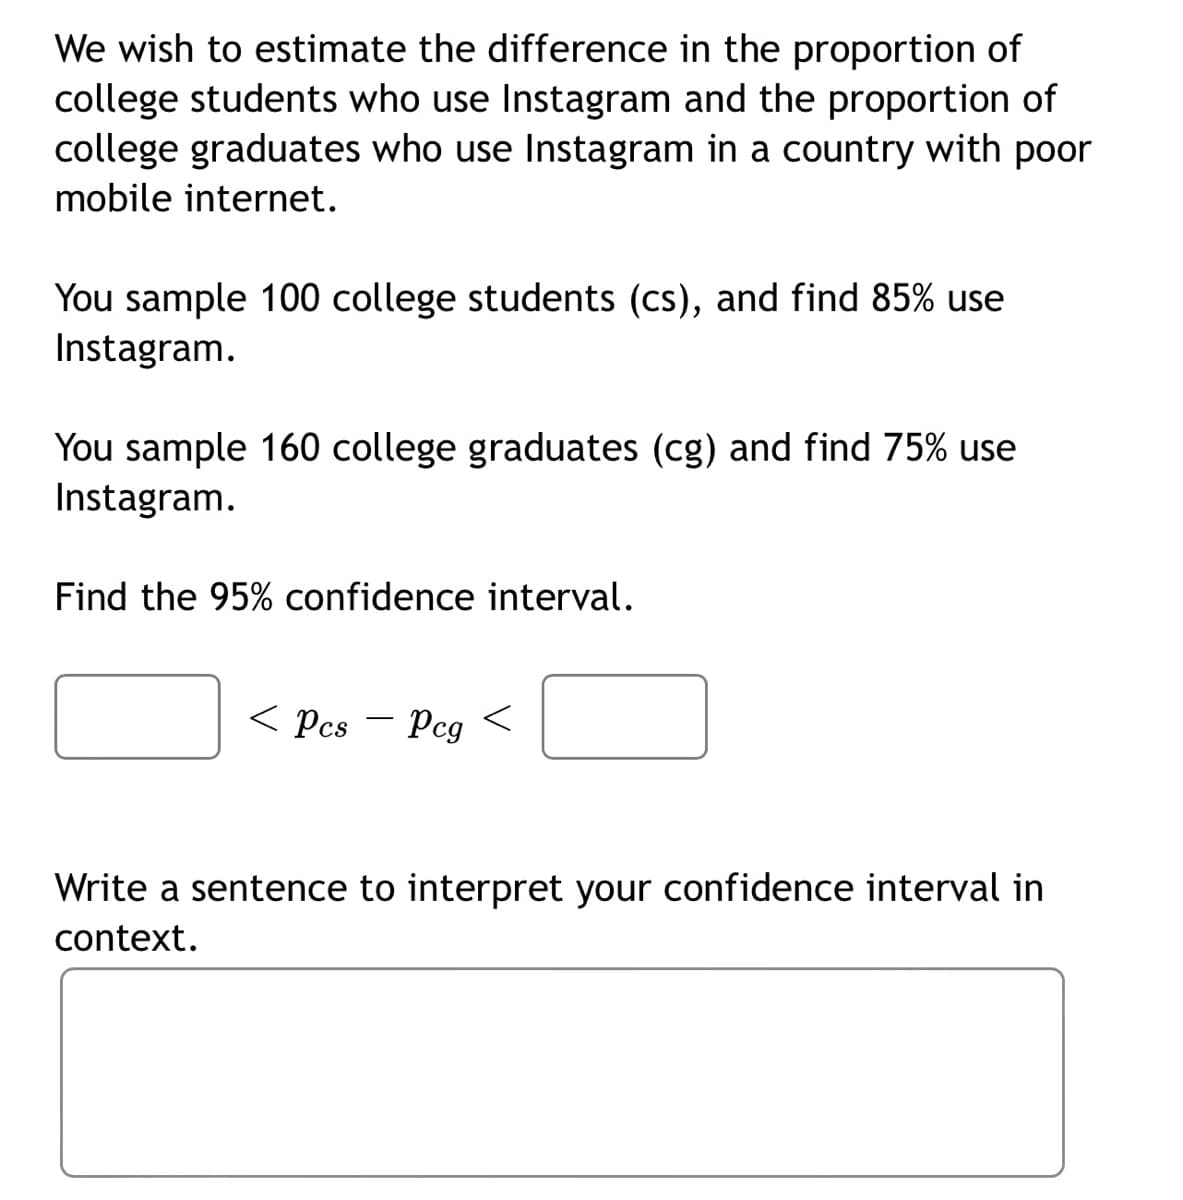 We wish to estimate the difference in the proportion of
college students who use Instagram and the proportion of
college graduates who use Instagram in a country with poor
mobile internet.
You sample 100 college students (cs), and find 85% use
Instagram.
You sample 160 college graduates (cg) and find 75% use
Instagram.
Find the 95% confidence interval.
< Pcs
Pcg
Write a sentence to interpret your confidence interval in
context.
